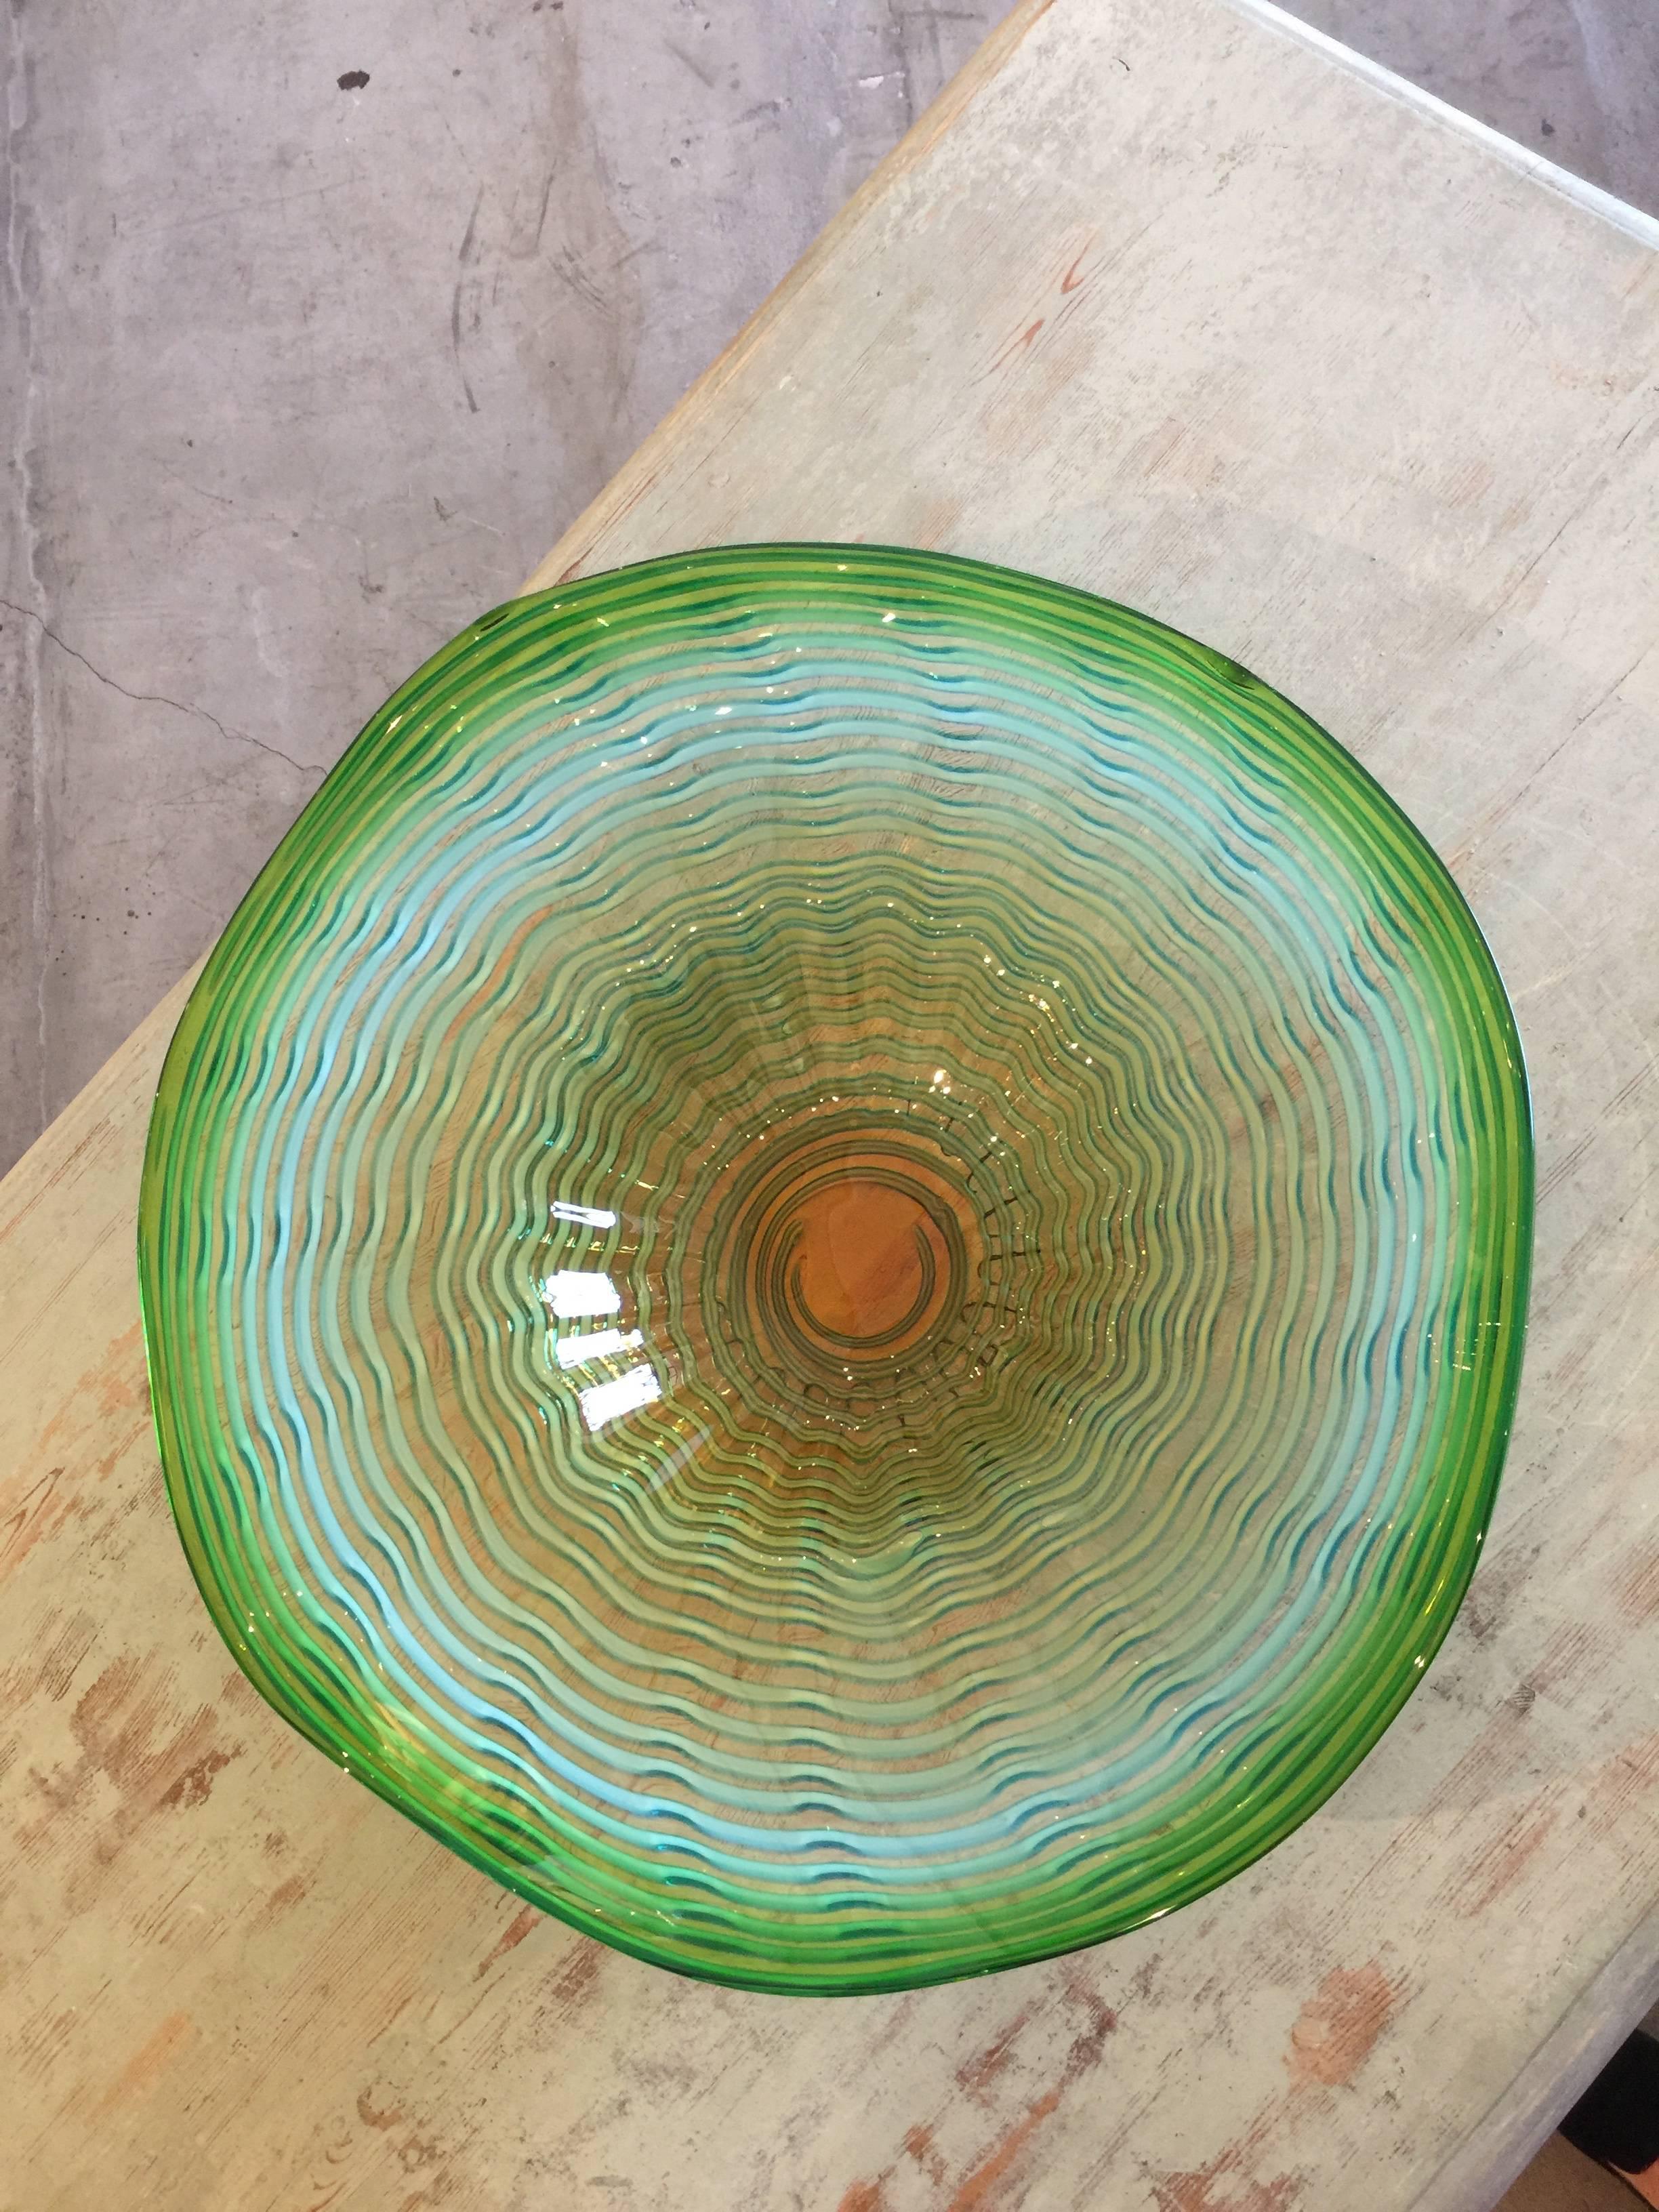 Vibrant colors of greens, blues and corals show through this free formed and raised ridges bowl.

Measures: D 19.25'', H 5.75''.
 